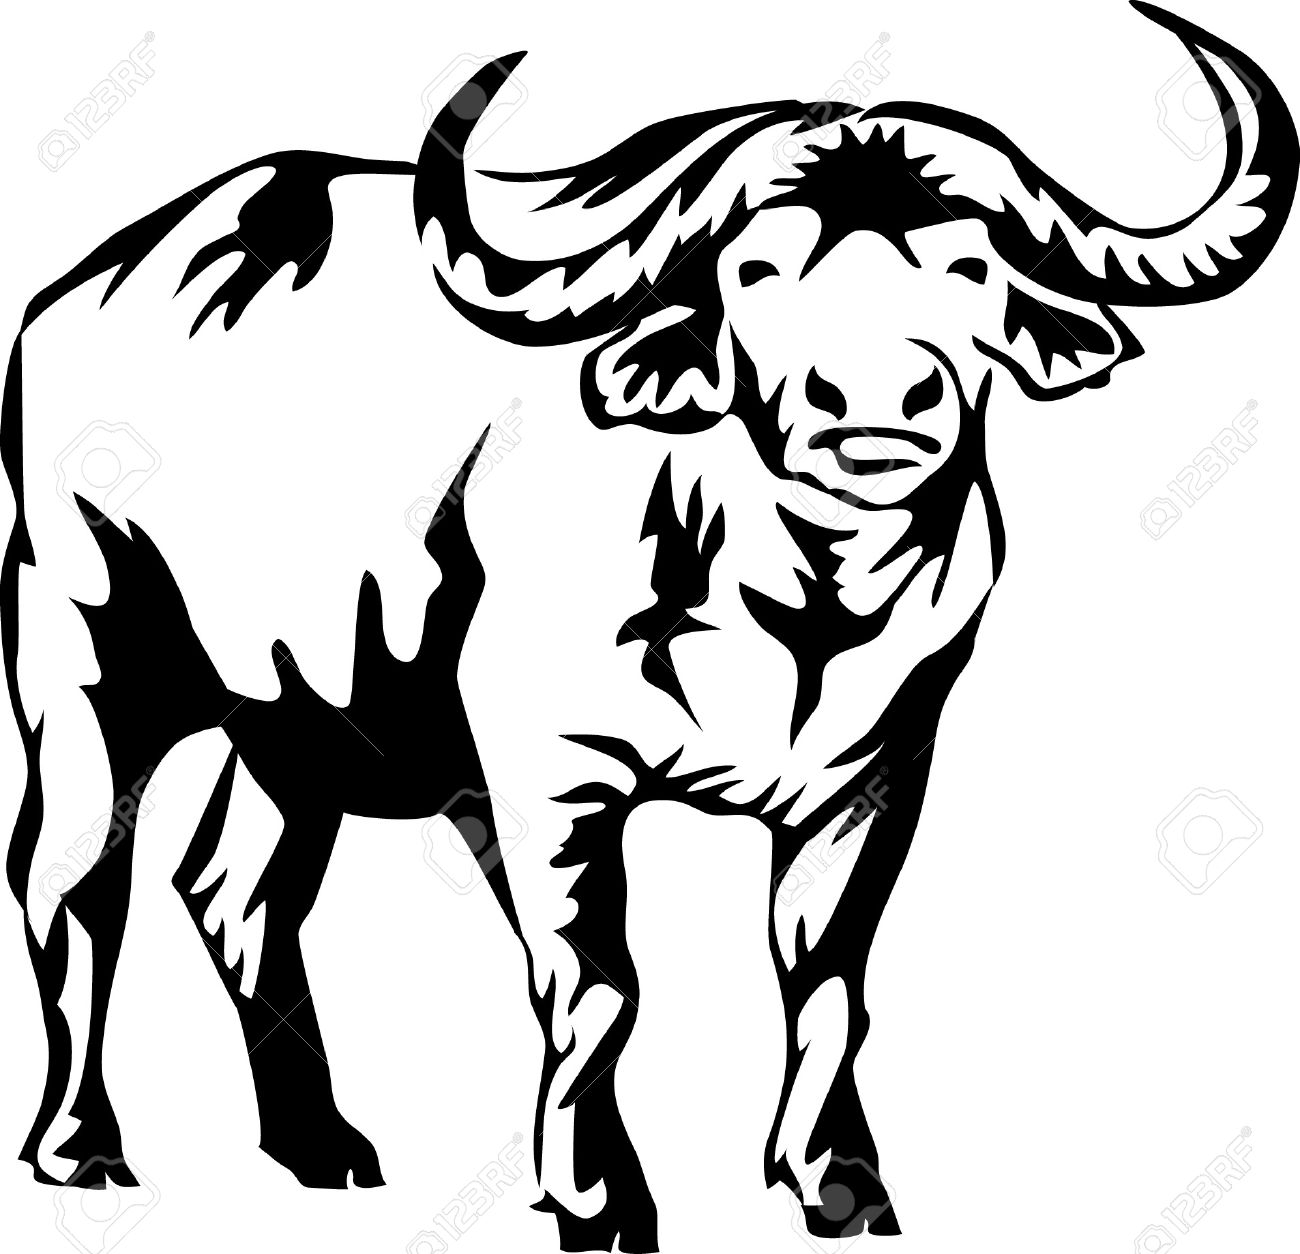 Buffalo clipart drawing.  collection of indian